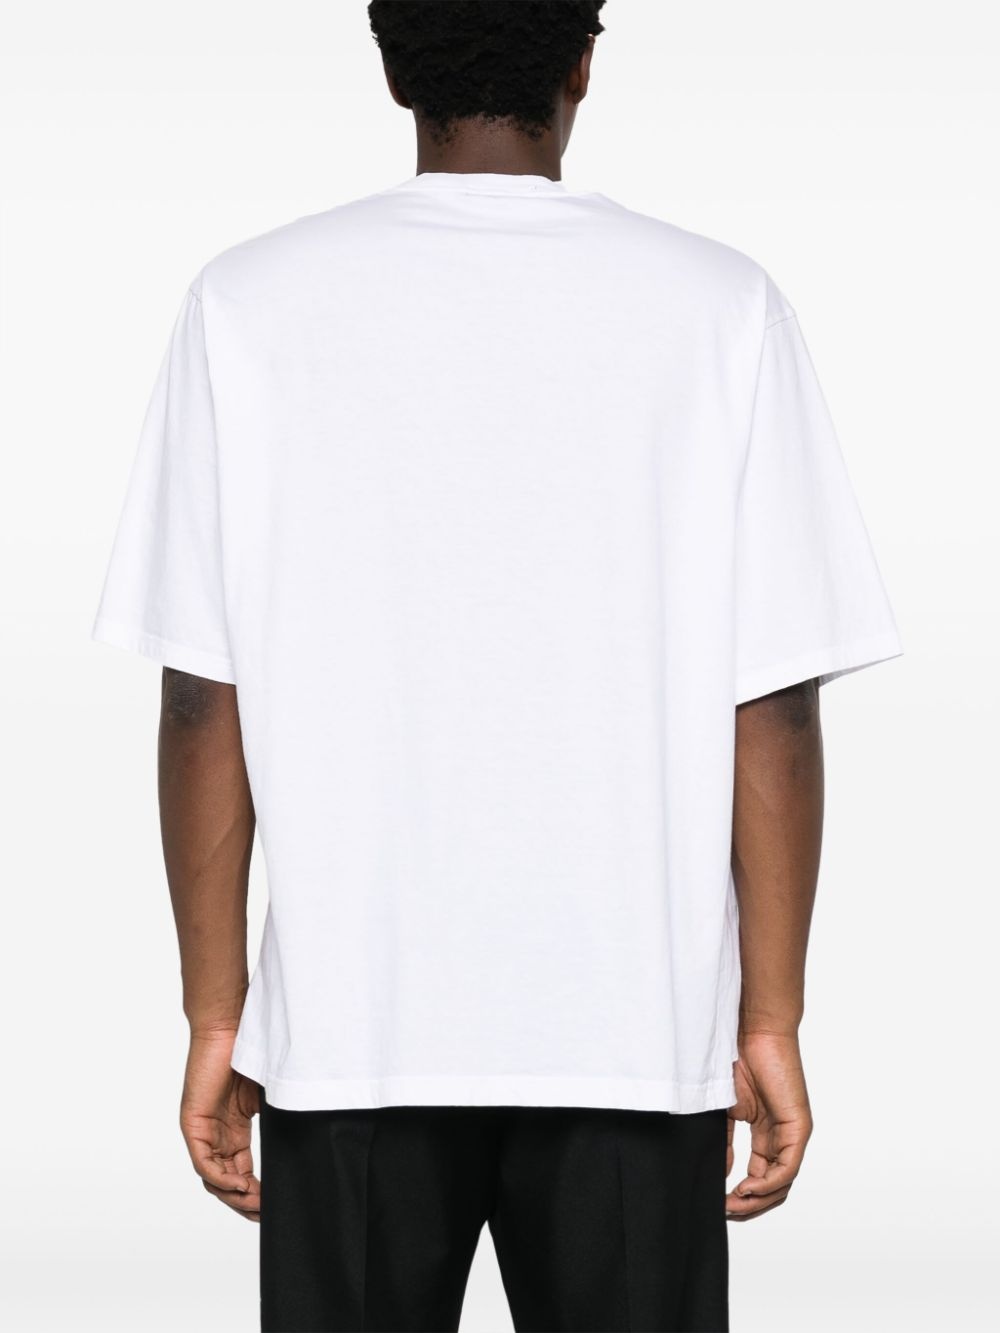 UNDERCOVER ripped-detailing cotton T-shirt | REVERSIBLE